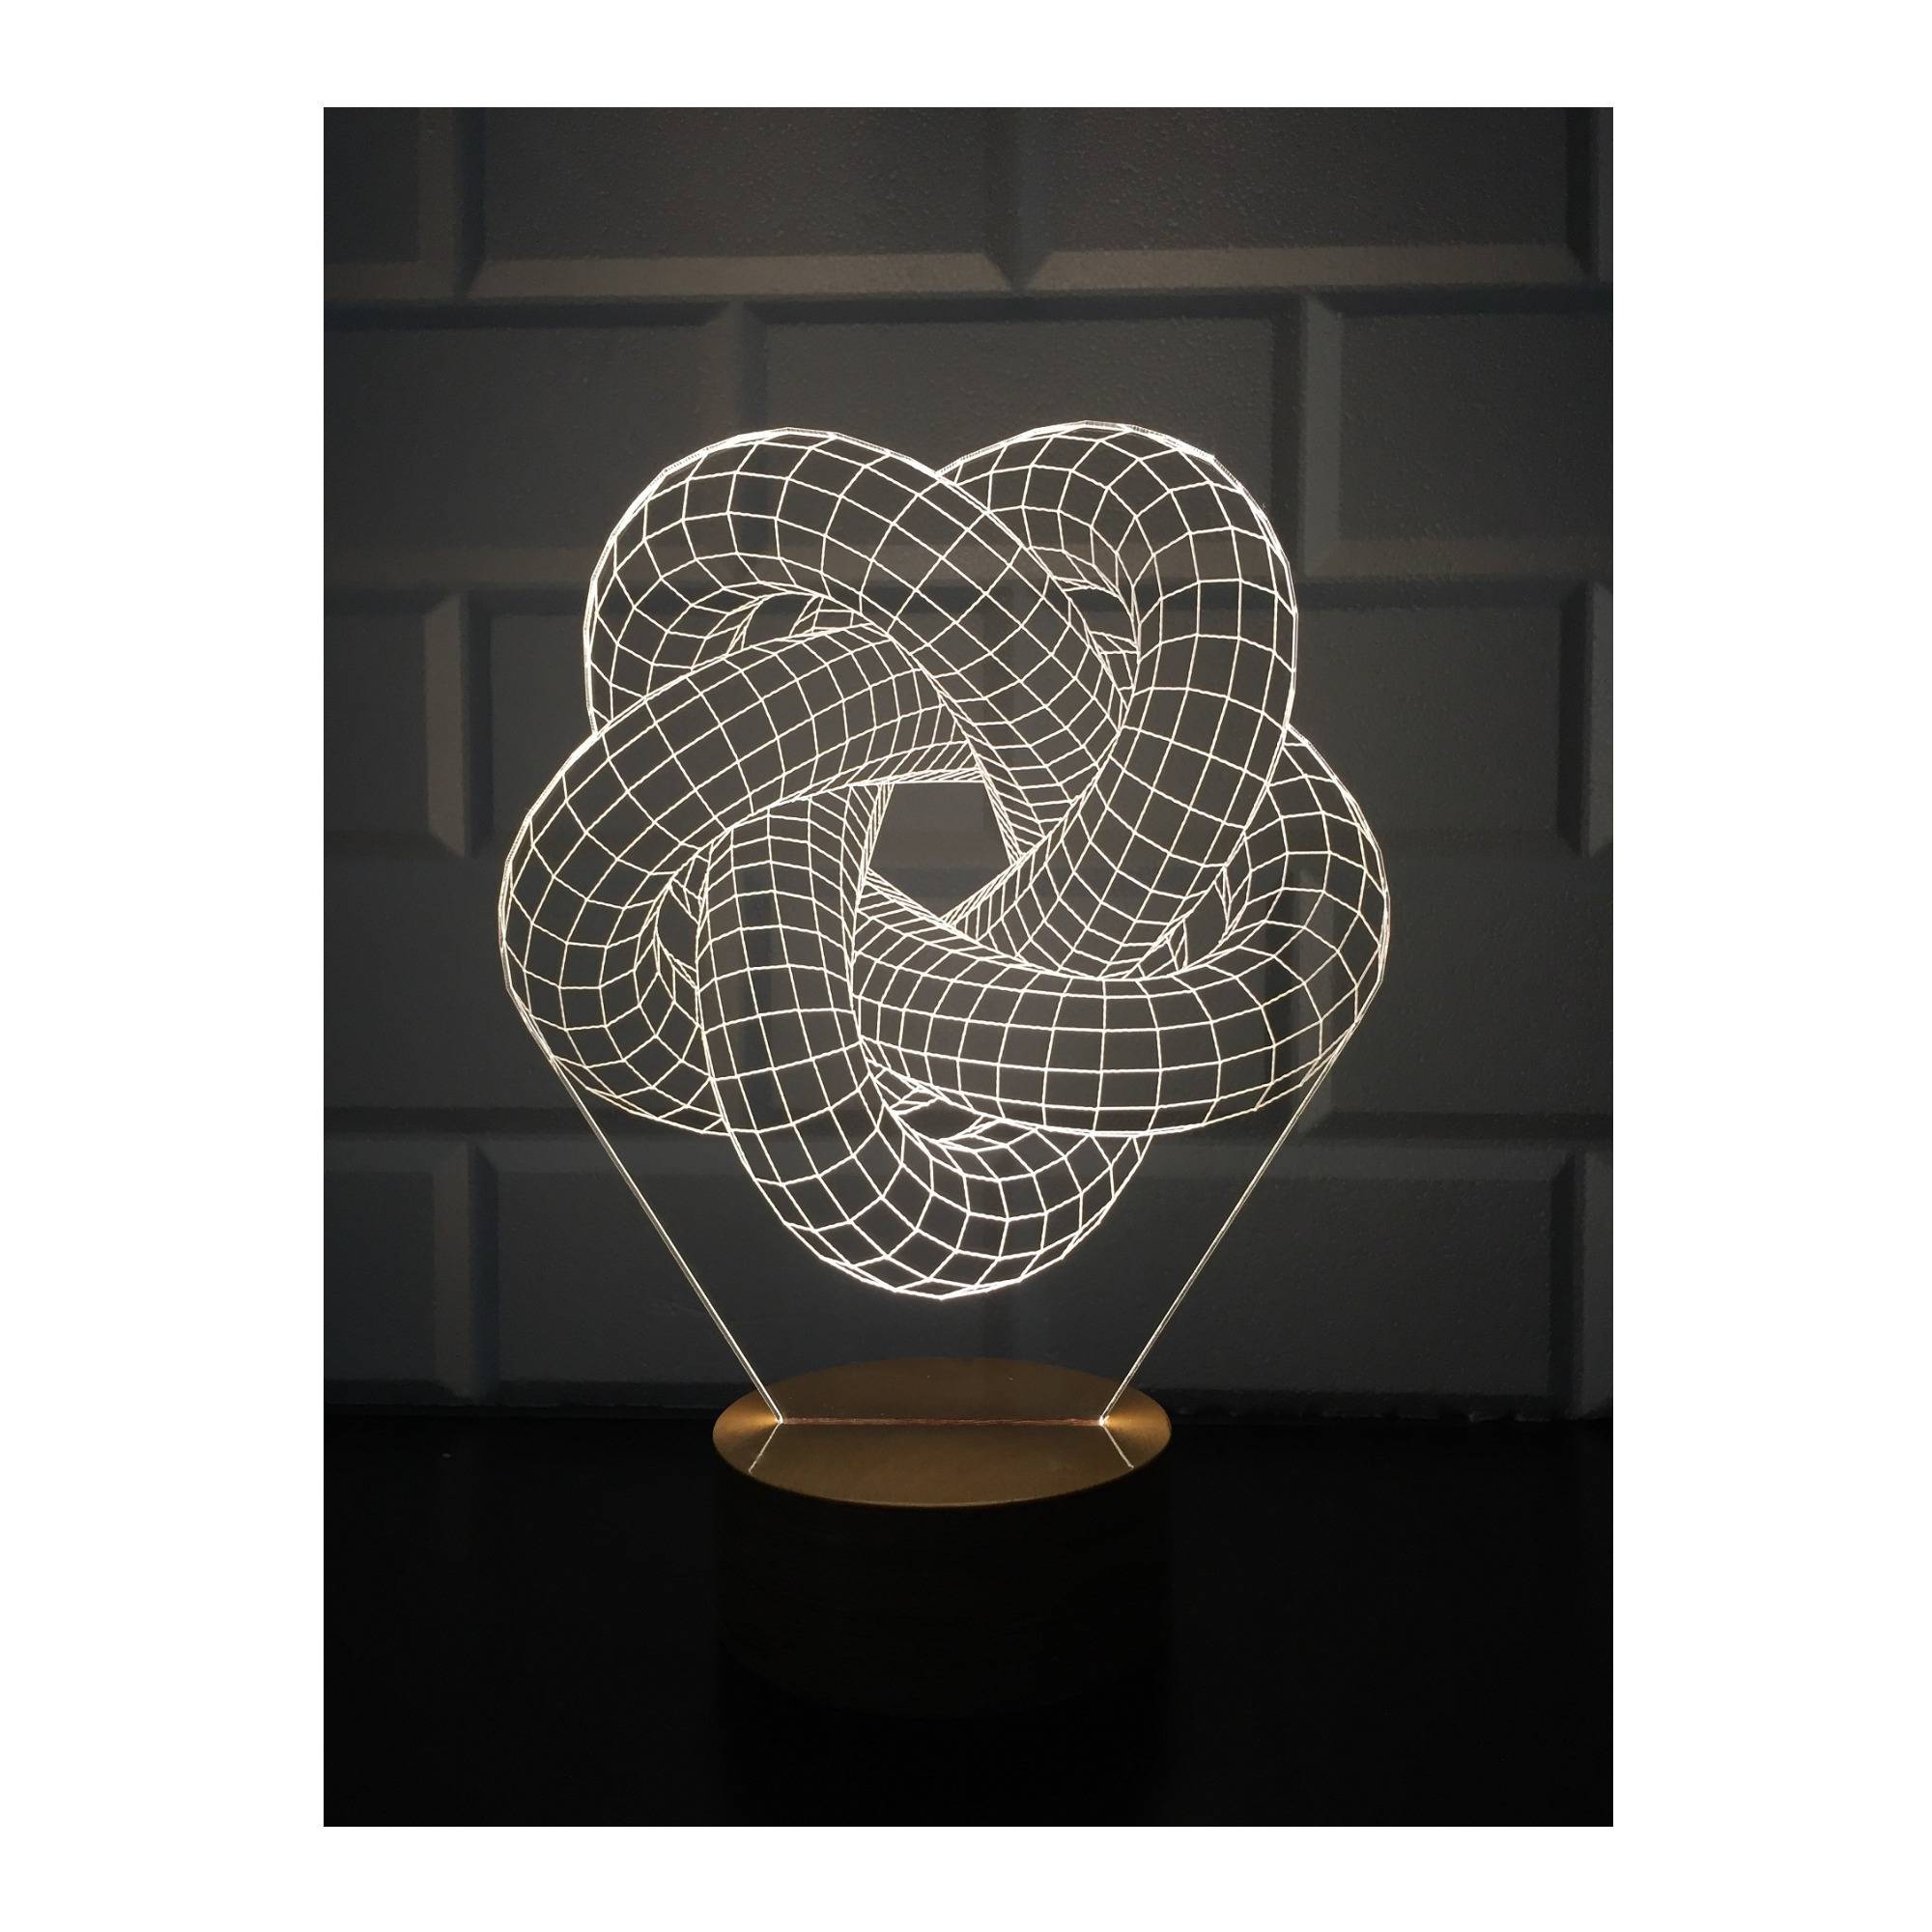 By-Lamp 3D Torus Spiral Lamp with Handmade Wooden Base